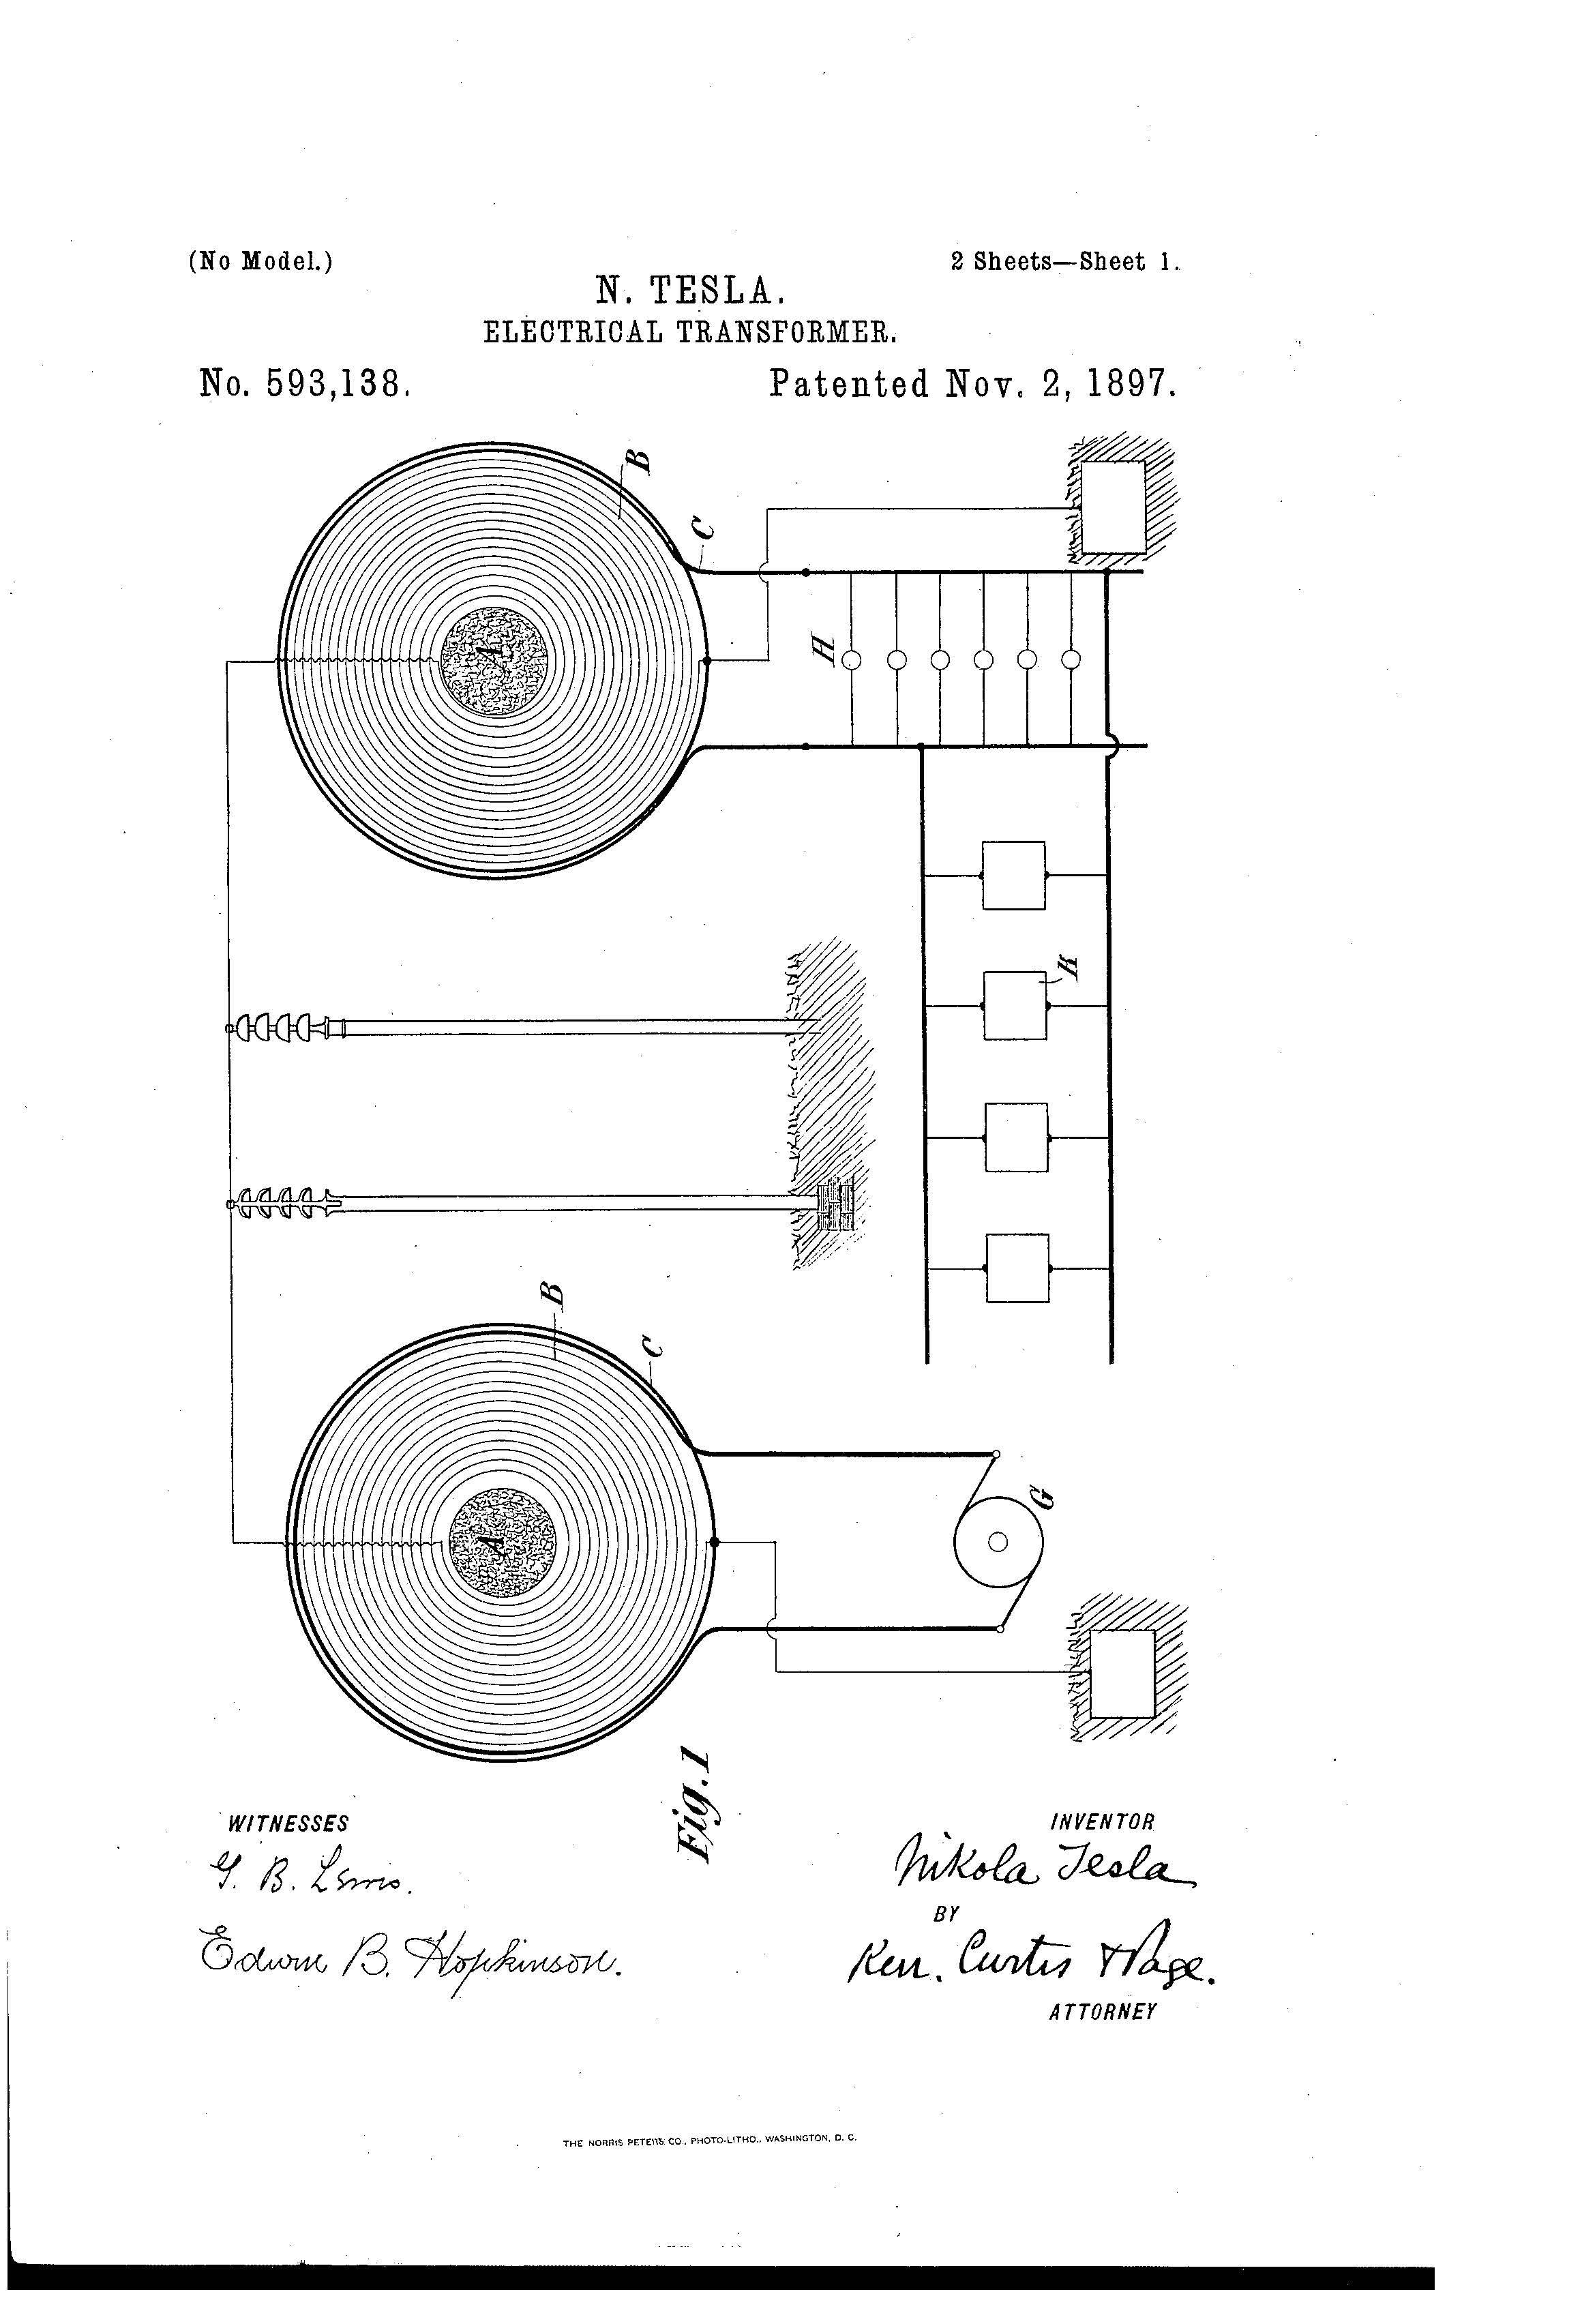 patent-illustration-electrical-transformer_page_1